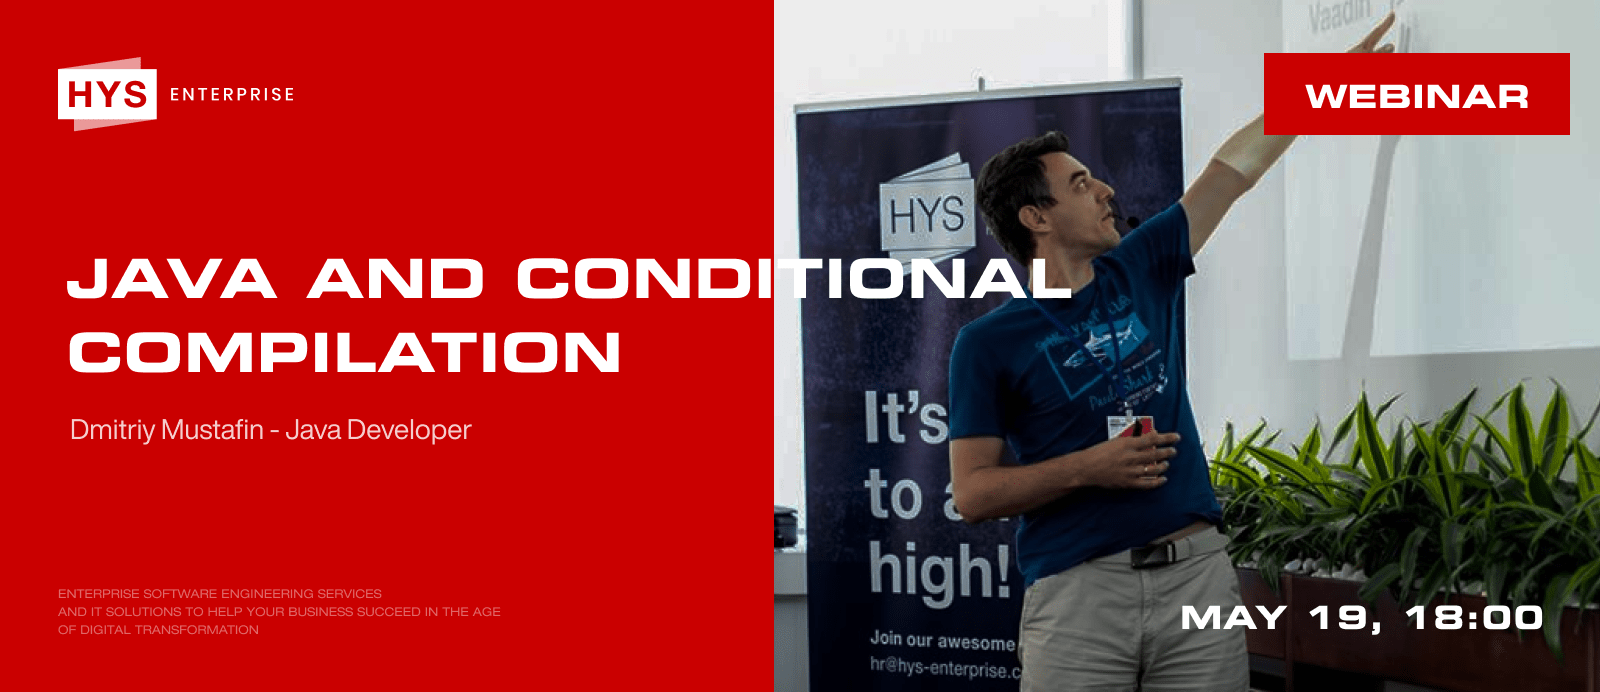 Java and Conditional Compilation. Webinar